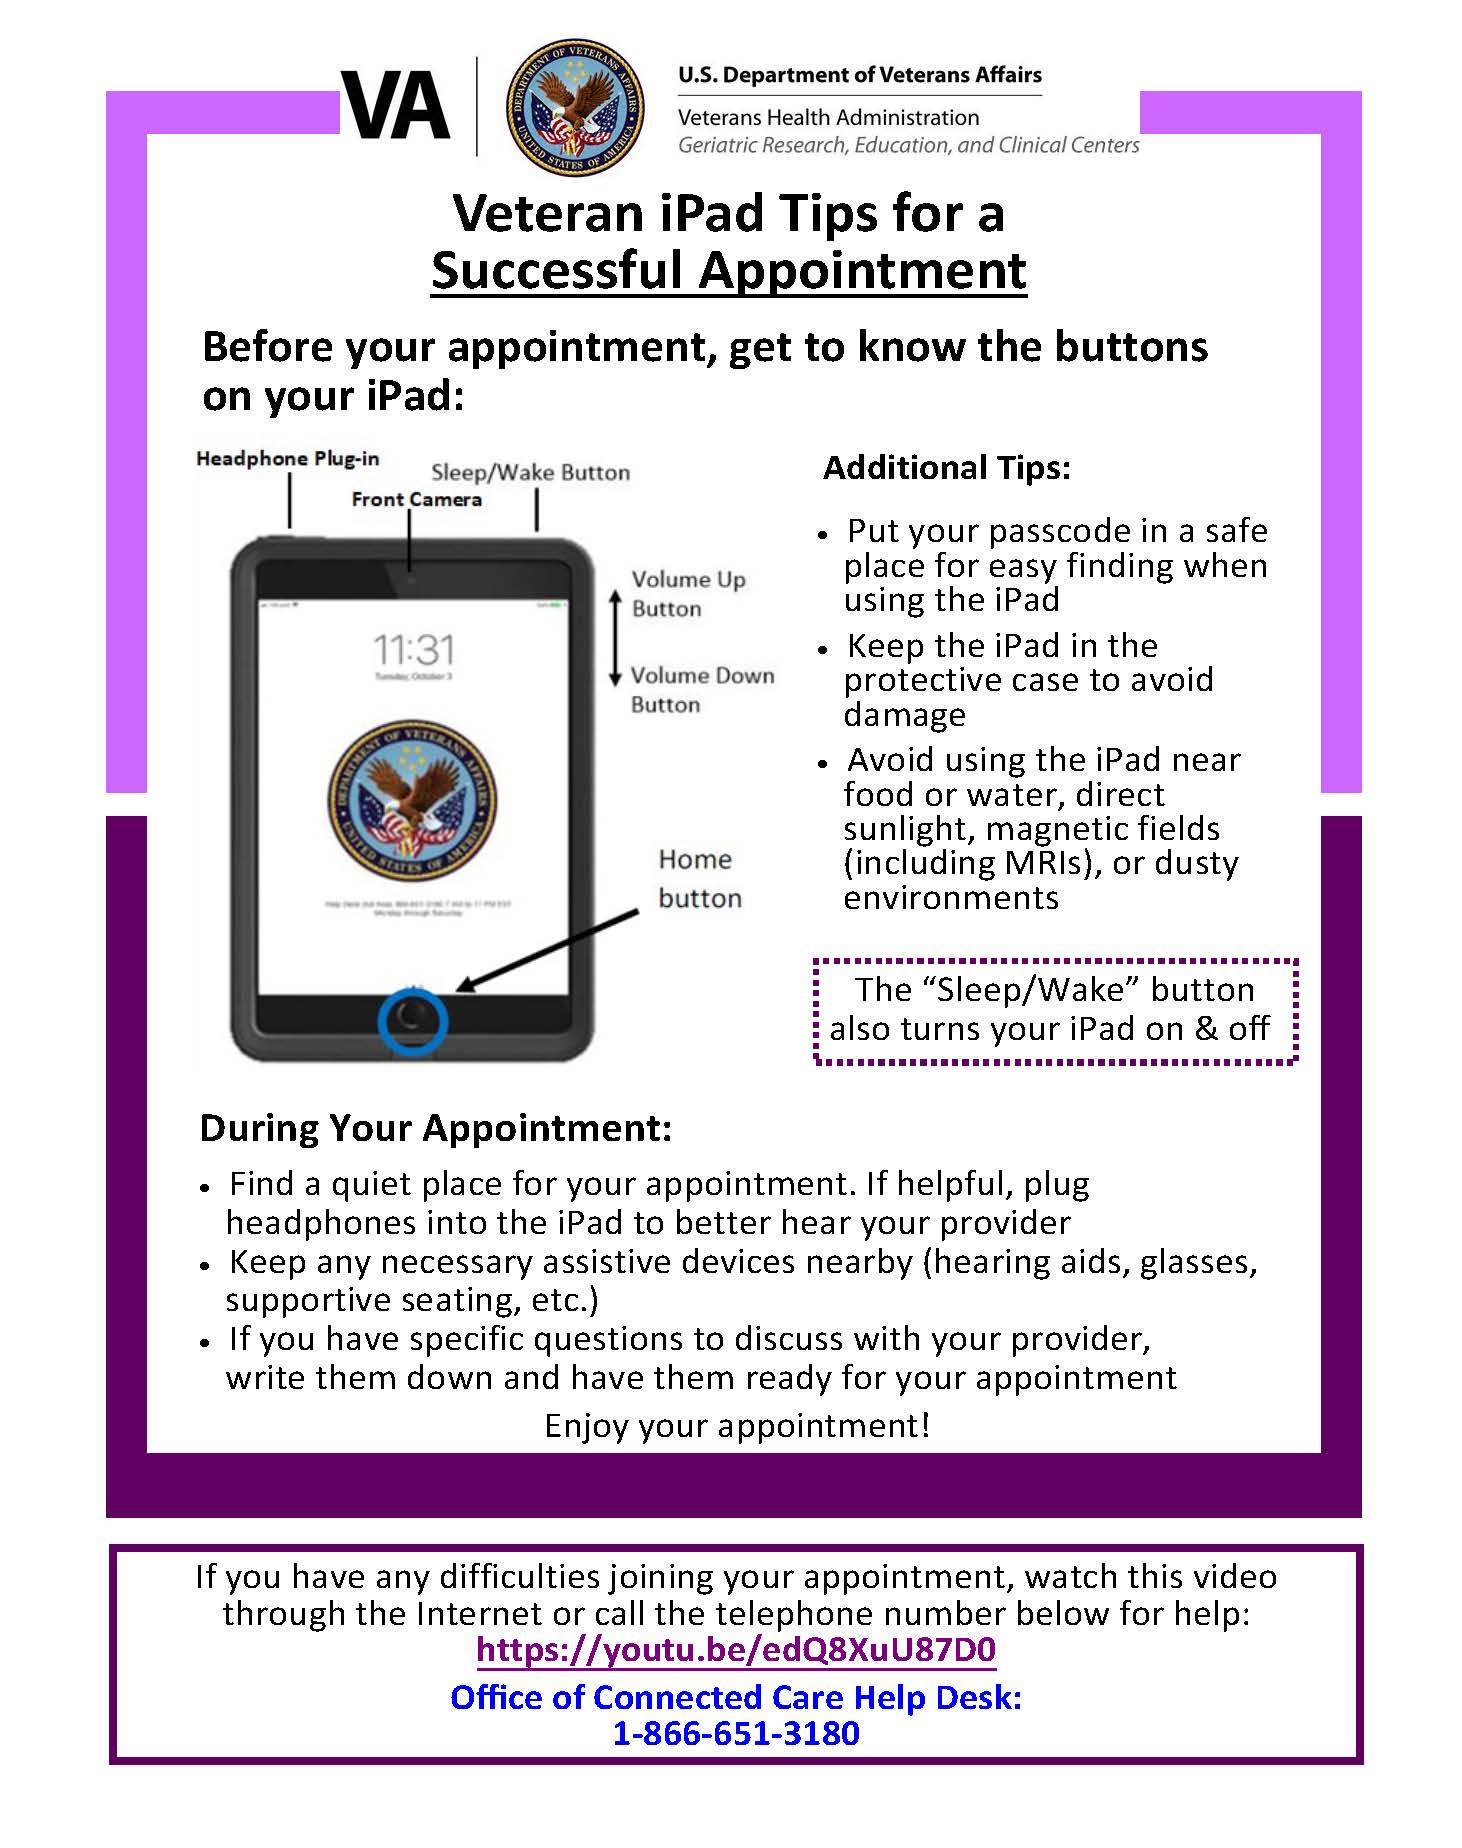 Veteran iPad Tips for a successful appointment